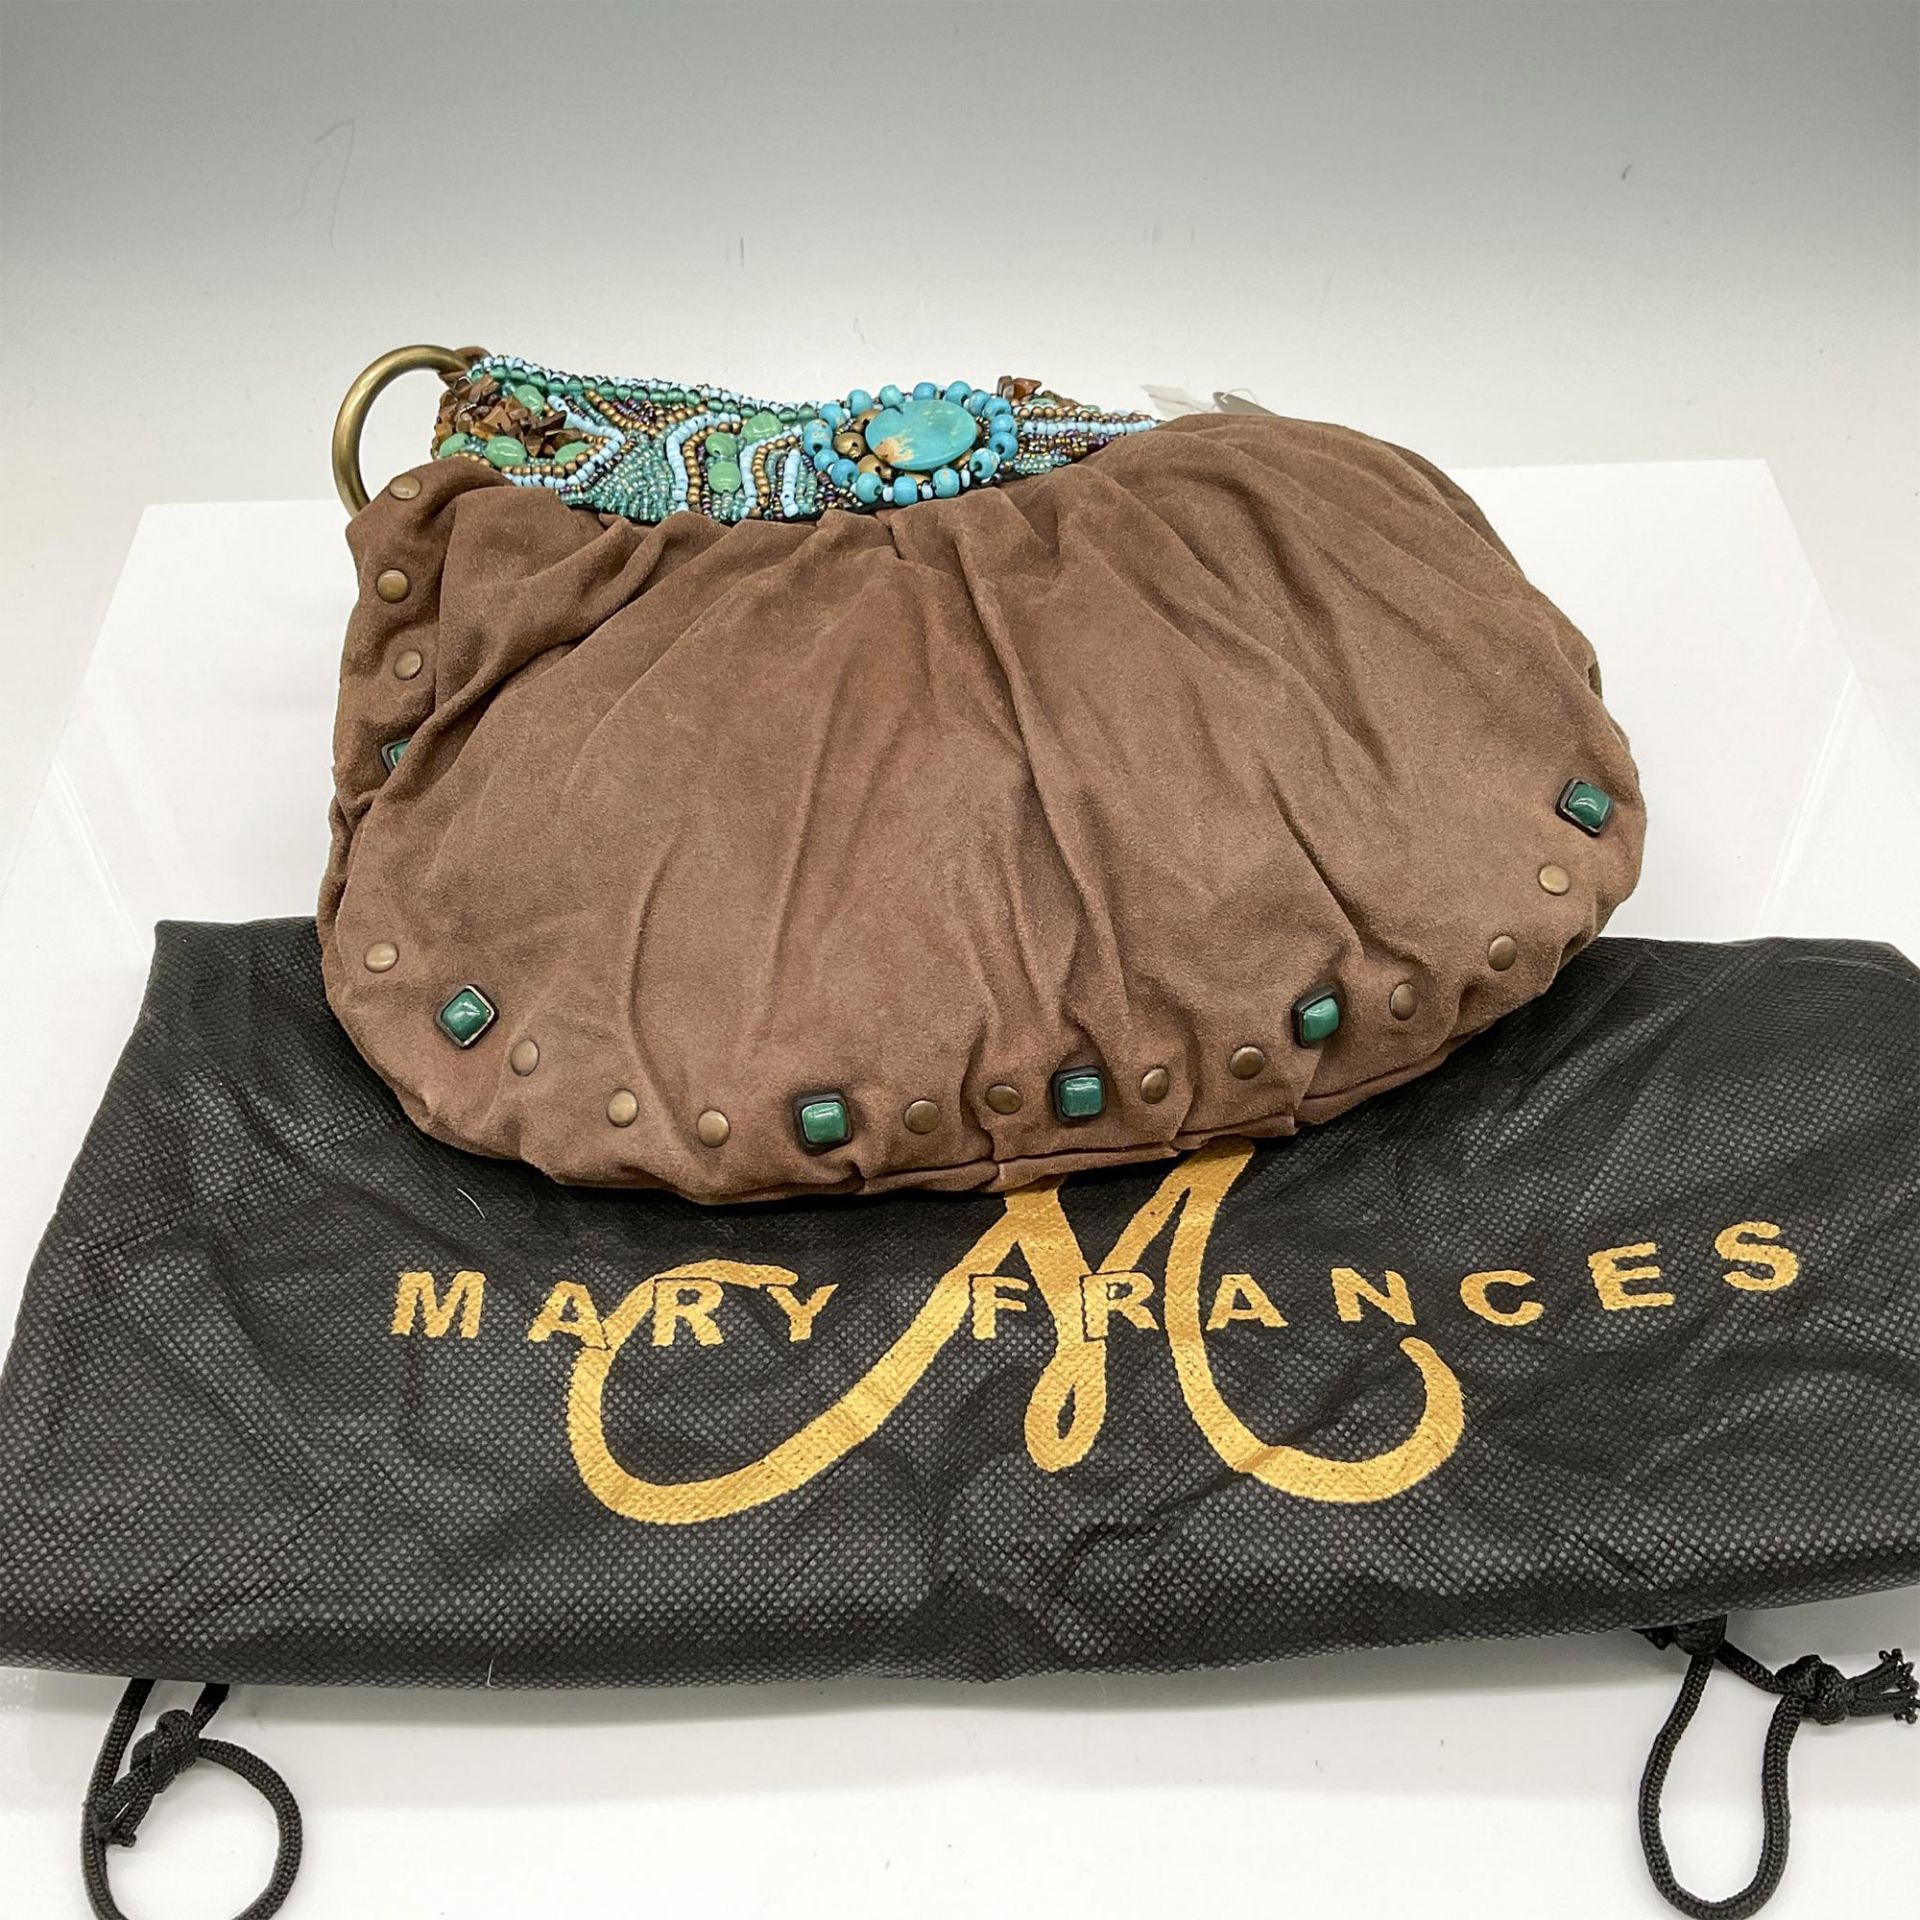 Mary Frances Hand Bag, Rough and Ready - Image 3 of 3